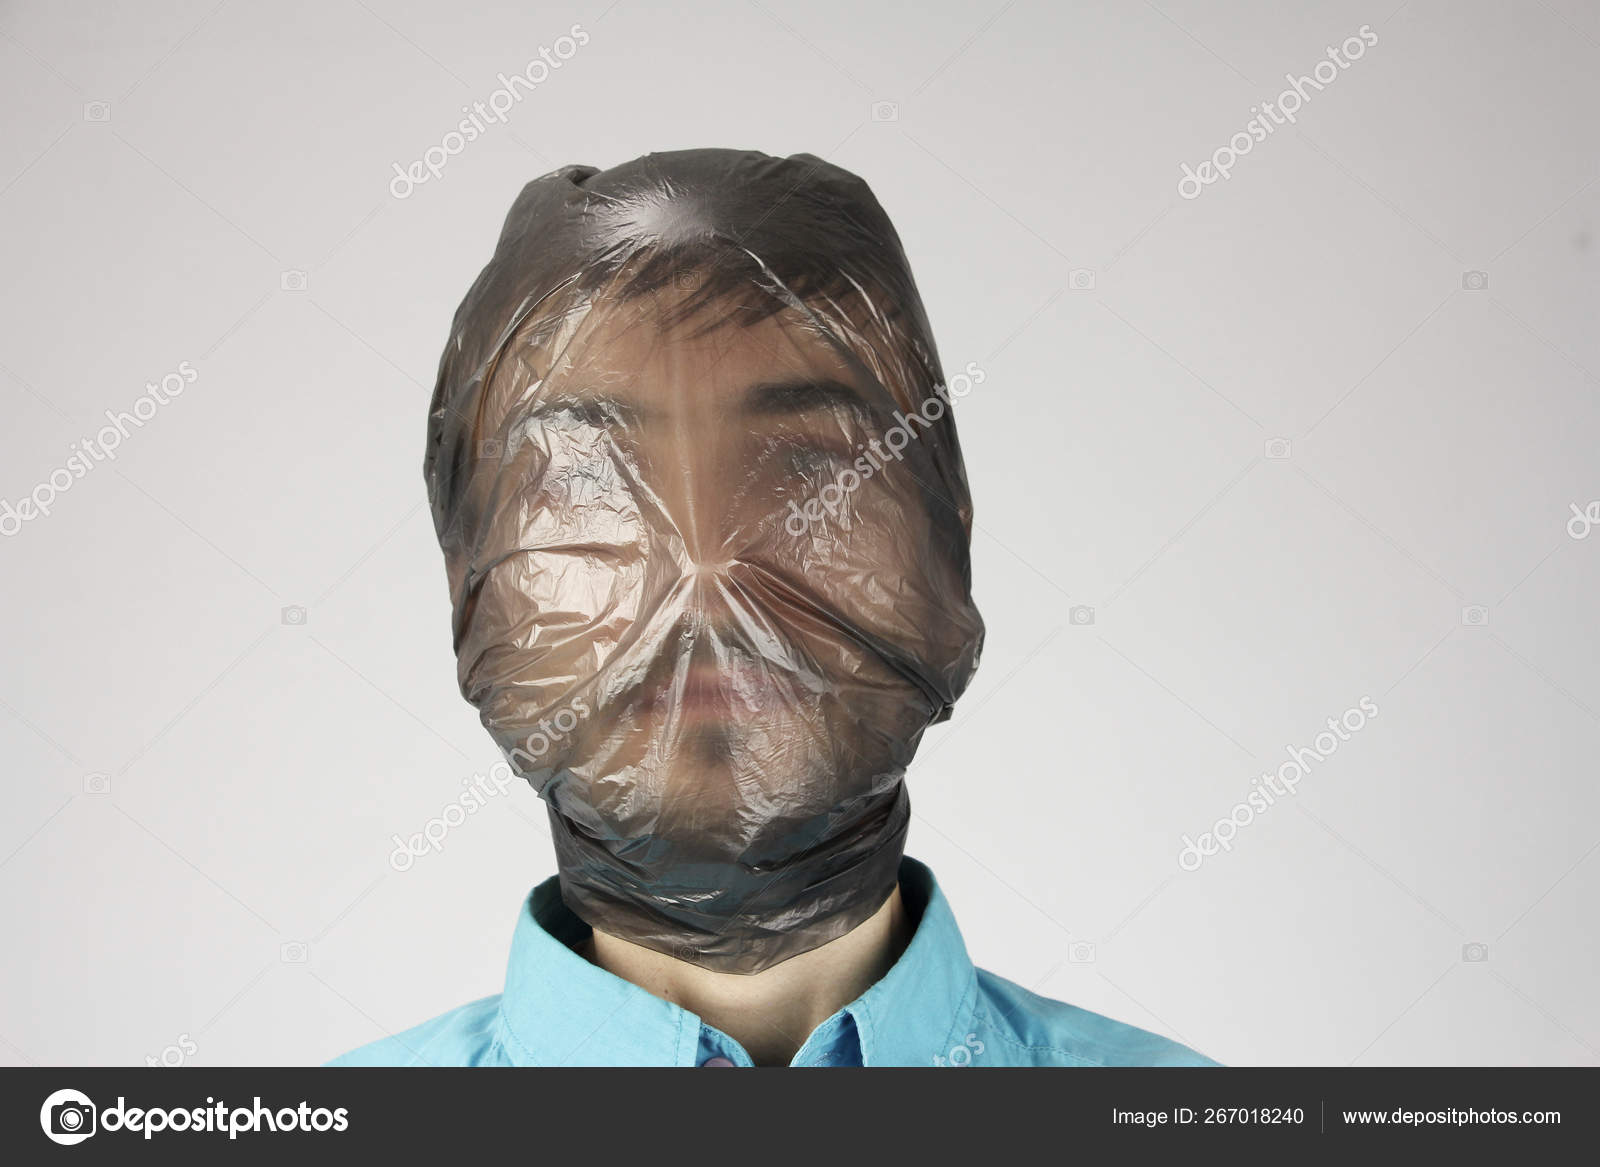 Black plastic bag wraps around a head, gray background, concept of suffocating person, big ecology problem pollution, copy space Stock Photo ©worklater 267018240